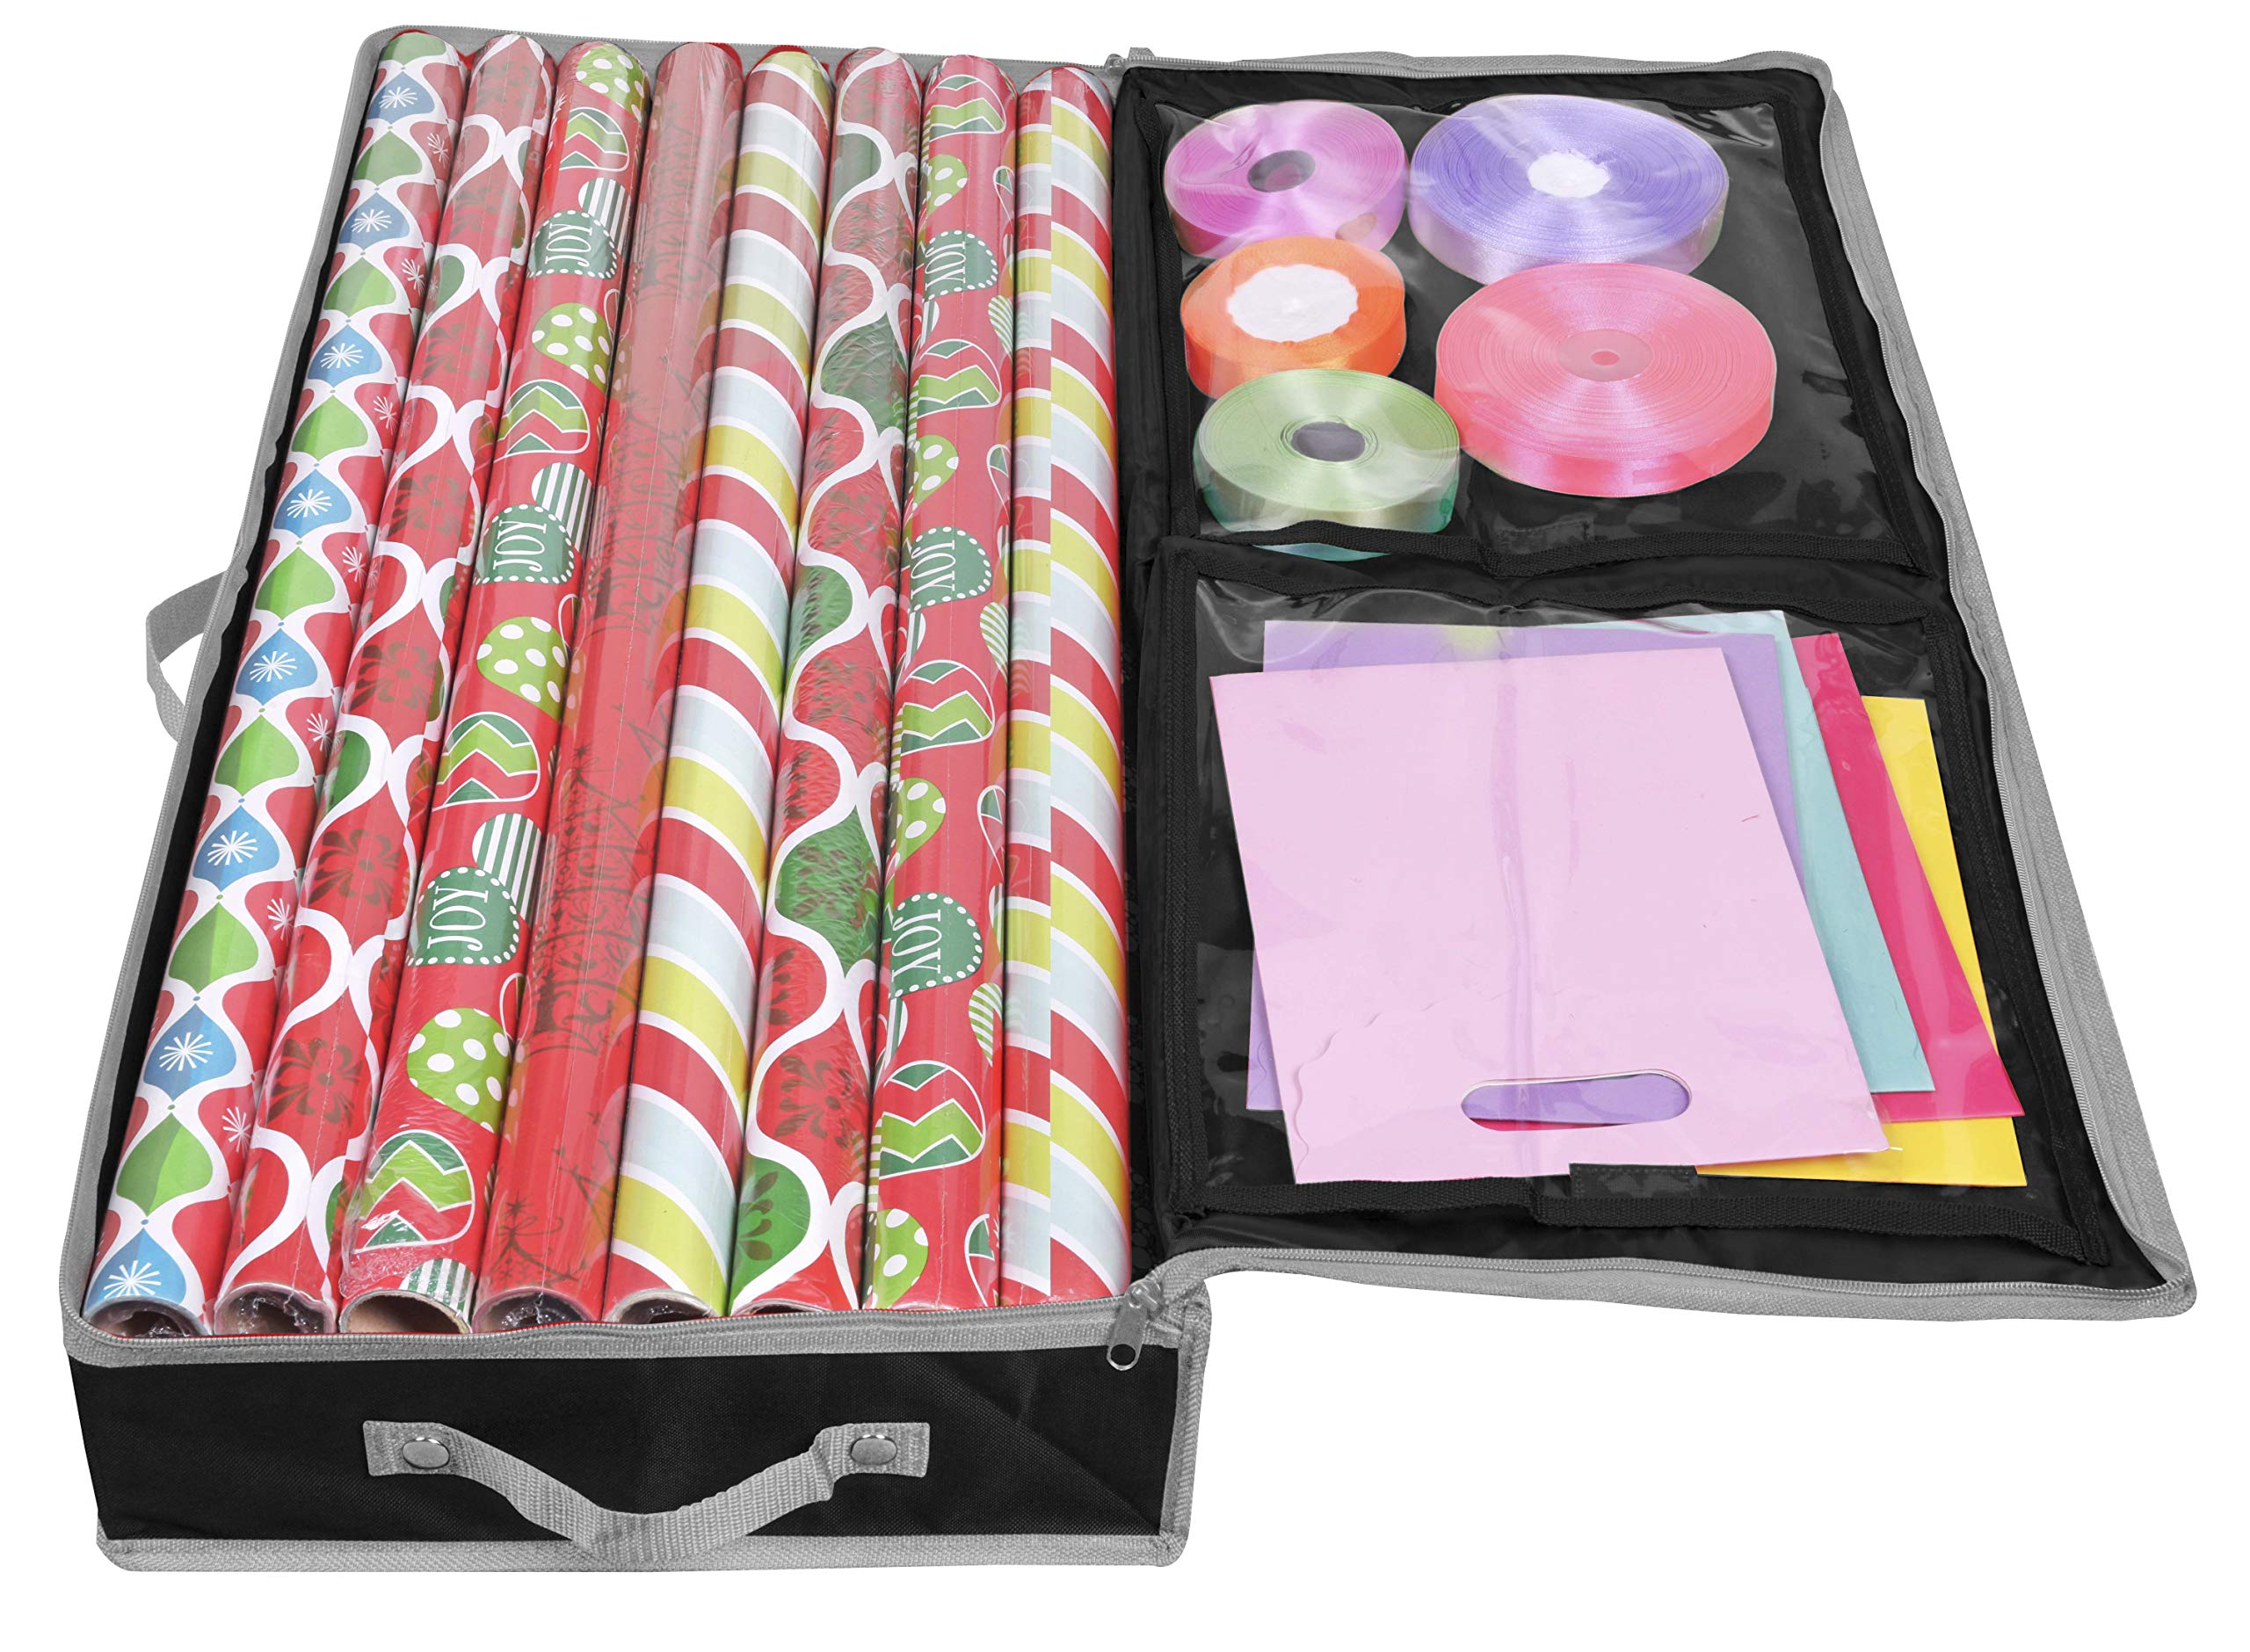 Primode Wrapping Paper Storage Container, Under Bed Gift Wrap Organizer for 30 Inch Wrapping Paper, 31”x13.5”x4.5”, Durable 600D Oxford Material, Storage Box Holder with Pockets for Ribbon, Bows, and Accessories (Black)